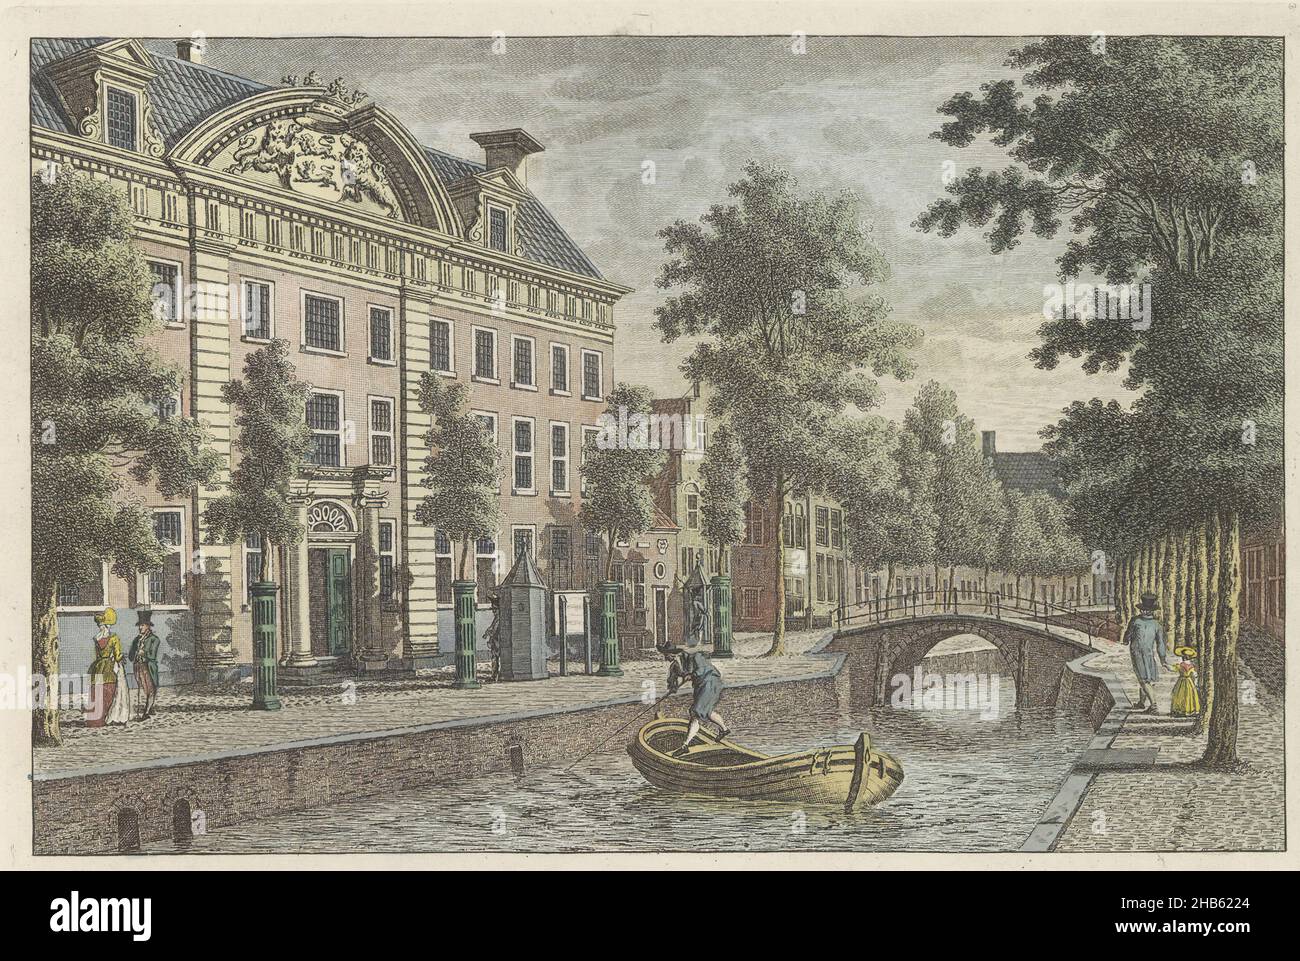 Provincial Building in Leeuwarden, ca. 1790T'Kollegie der Gedeputeerde Staaten, te Leeuwarden, Le Gouvernement - actuellement colêge des Etats députés à Leeuwarden (title on object), View of the College of Gedeputeerde Staten (Provincial House) at the Tweebaksmarkt in Leeuwarden, ca. 1790. Part of a plate work from c. 1824-1825 with 74 (unnumbered) plates of the most important topographical views and various customs in the United Kingdom of the Netherlands., print maker: Carel Frederik Bendorp (I), intermediary draughtsman: Jan Bulthuis, print maker: Netherlands, publisher: Amsterdam, 1786 Stock Photo